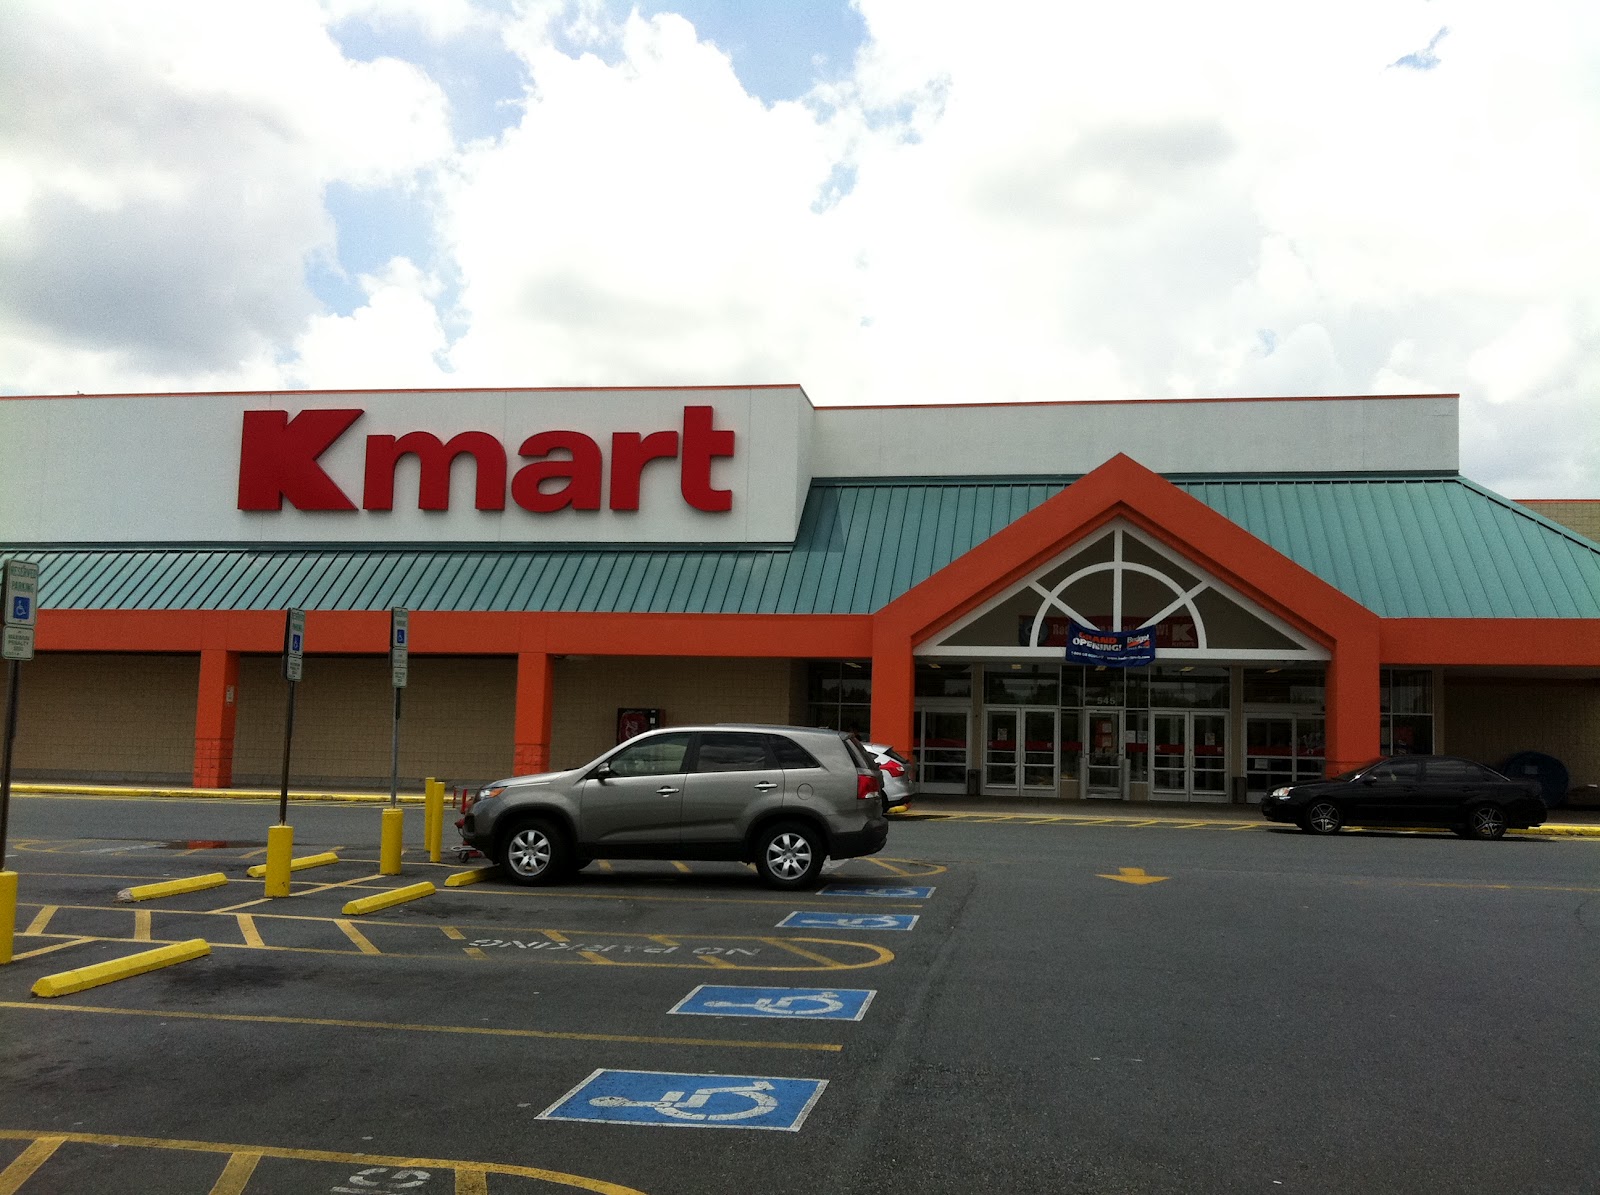 Image Super Kmart Stores Pc Android iPhone And iPad Wallpaper